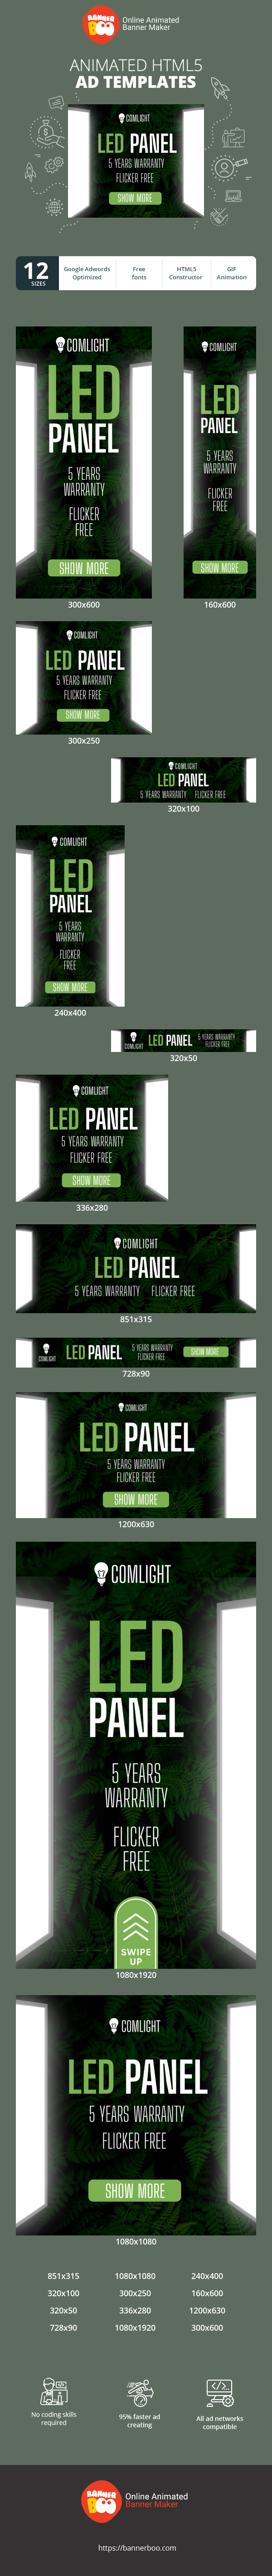 Banner ad template — Led Panel — 5 Years Warranty Flicker Free